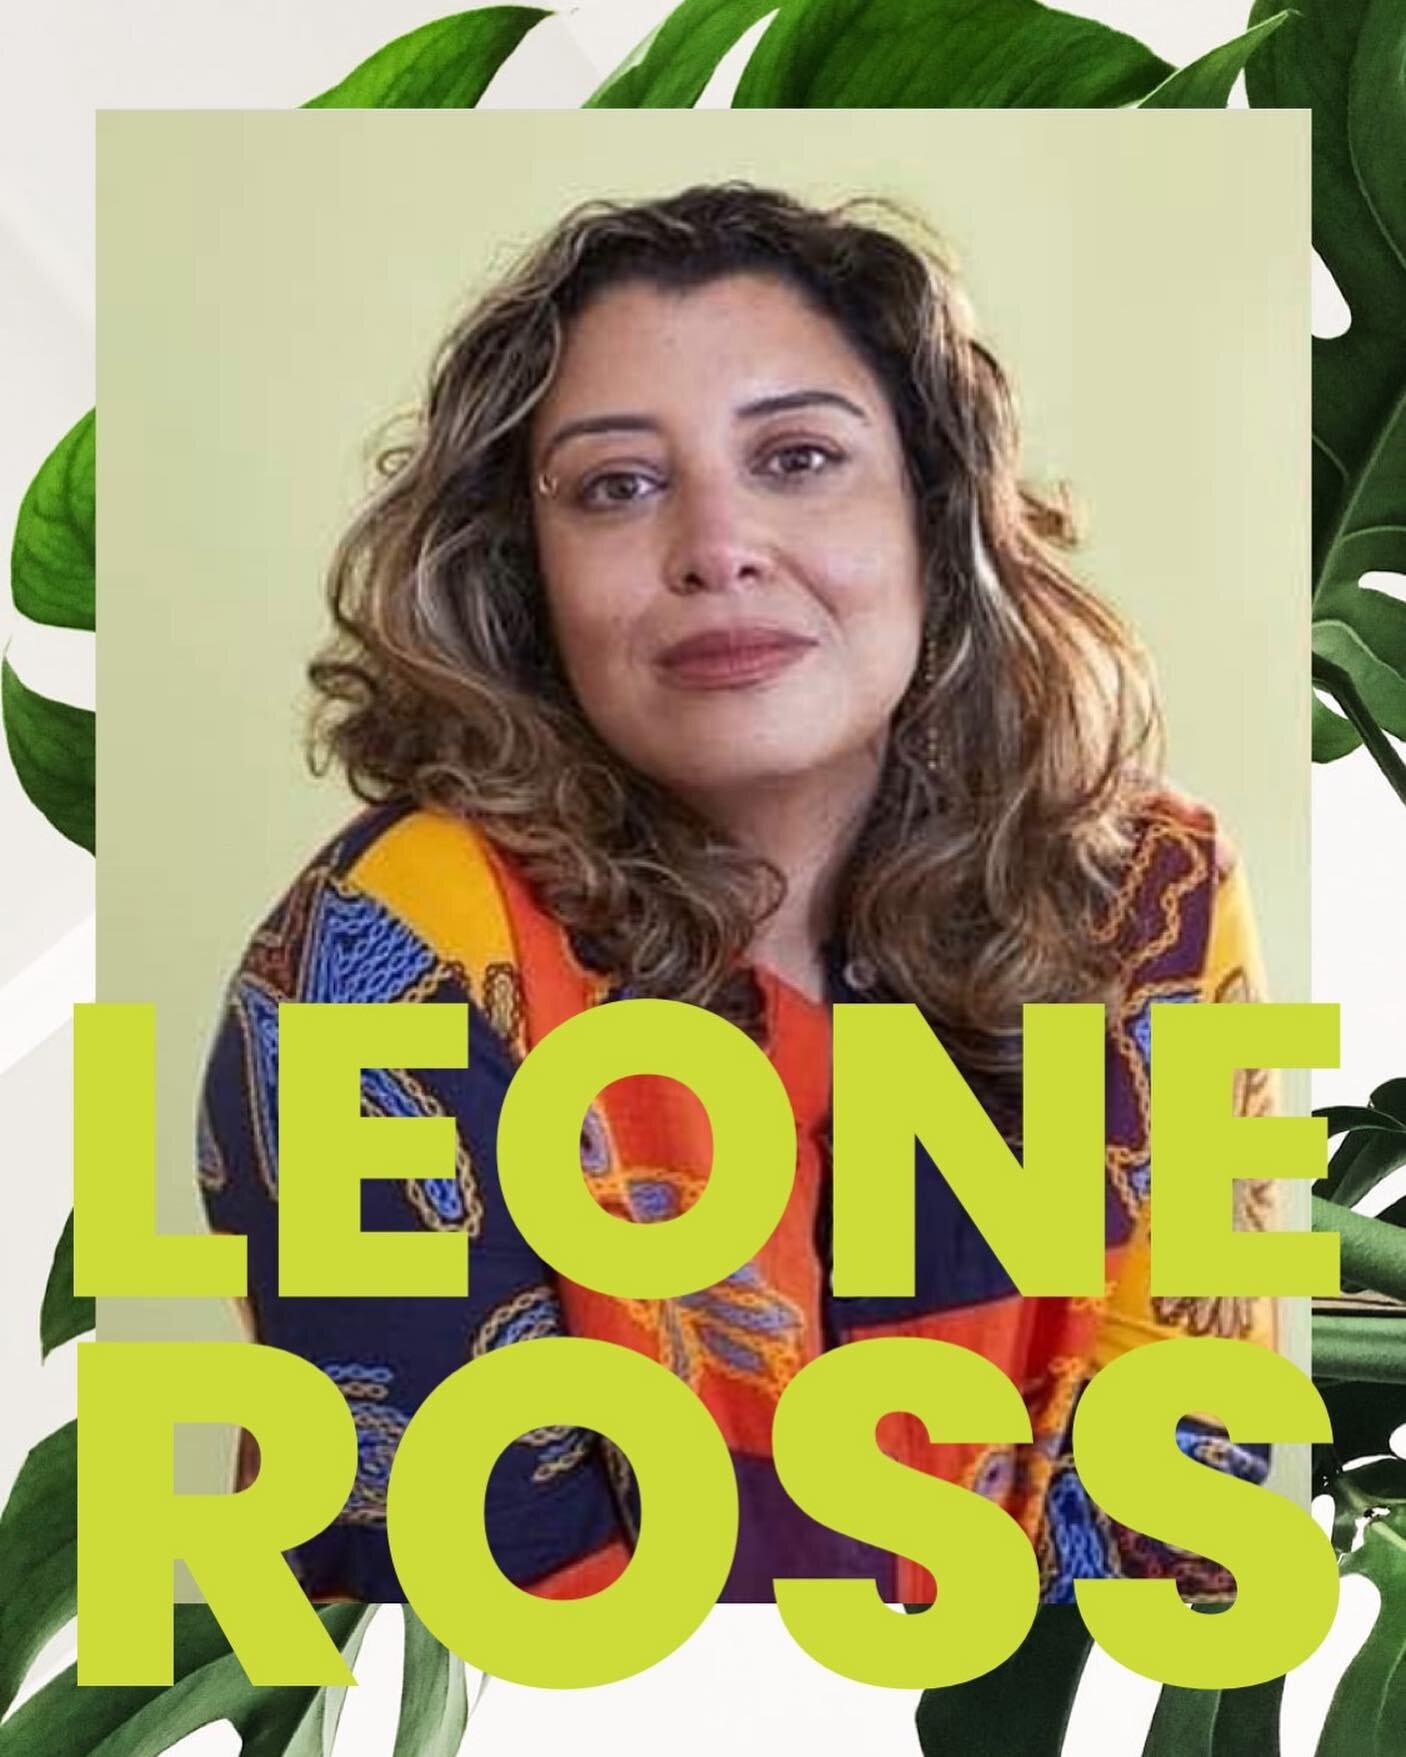 POPISHO with LEONE ROSS

Welcome to world of Popisho! @katefagan3 and @kathrynbudig muse about magic (why and when we lose our connection with it) then author @leone.ross (POPISHO) reassures Kathryn to stick to her magical guns. Leone shares what her